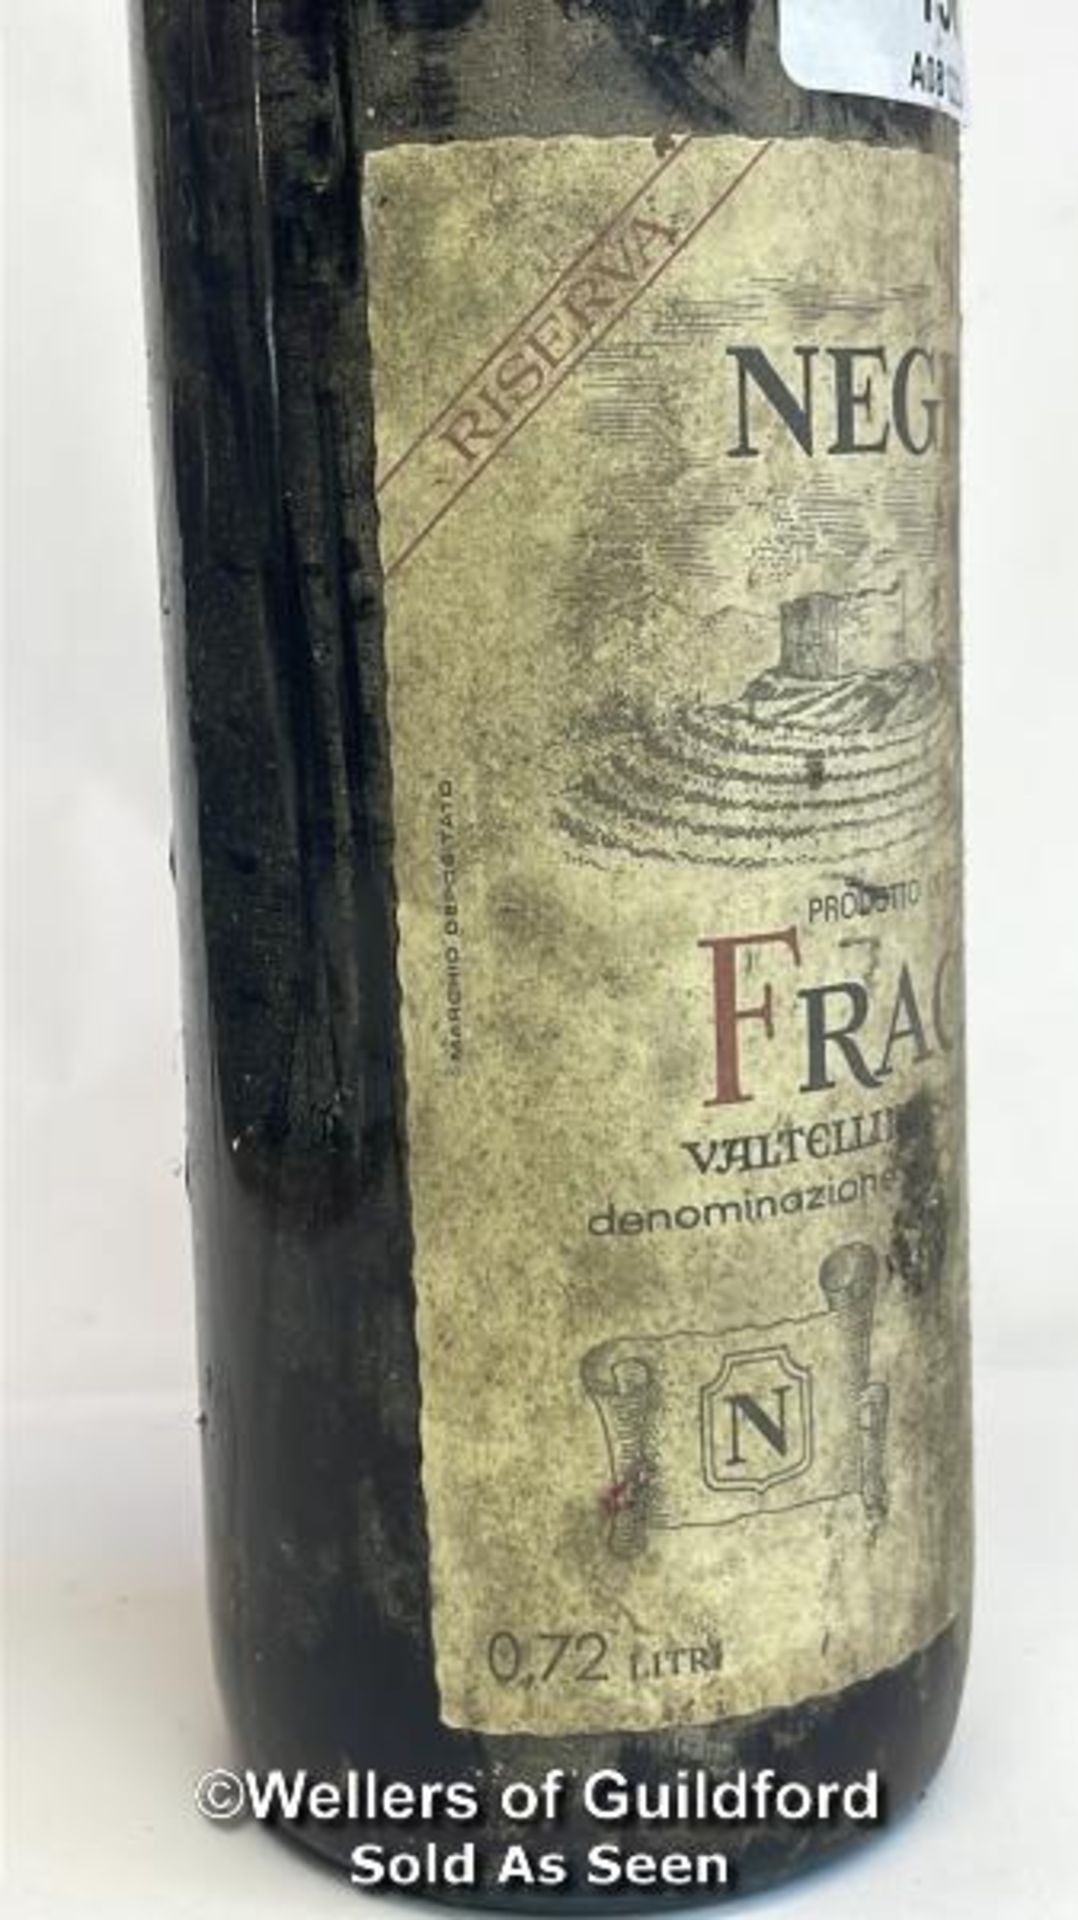 1971 Negri Fracia, 72cl, 12.5% vol / Please see images for fill level and general condition. - Bild 4 aus 7